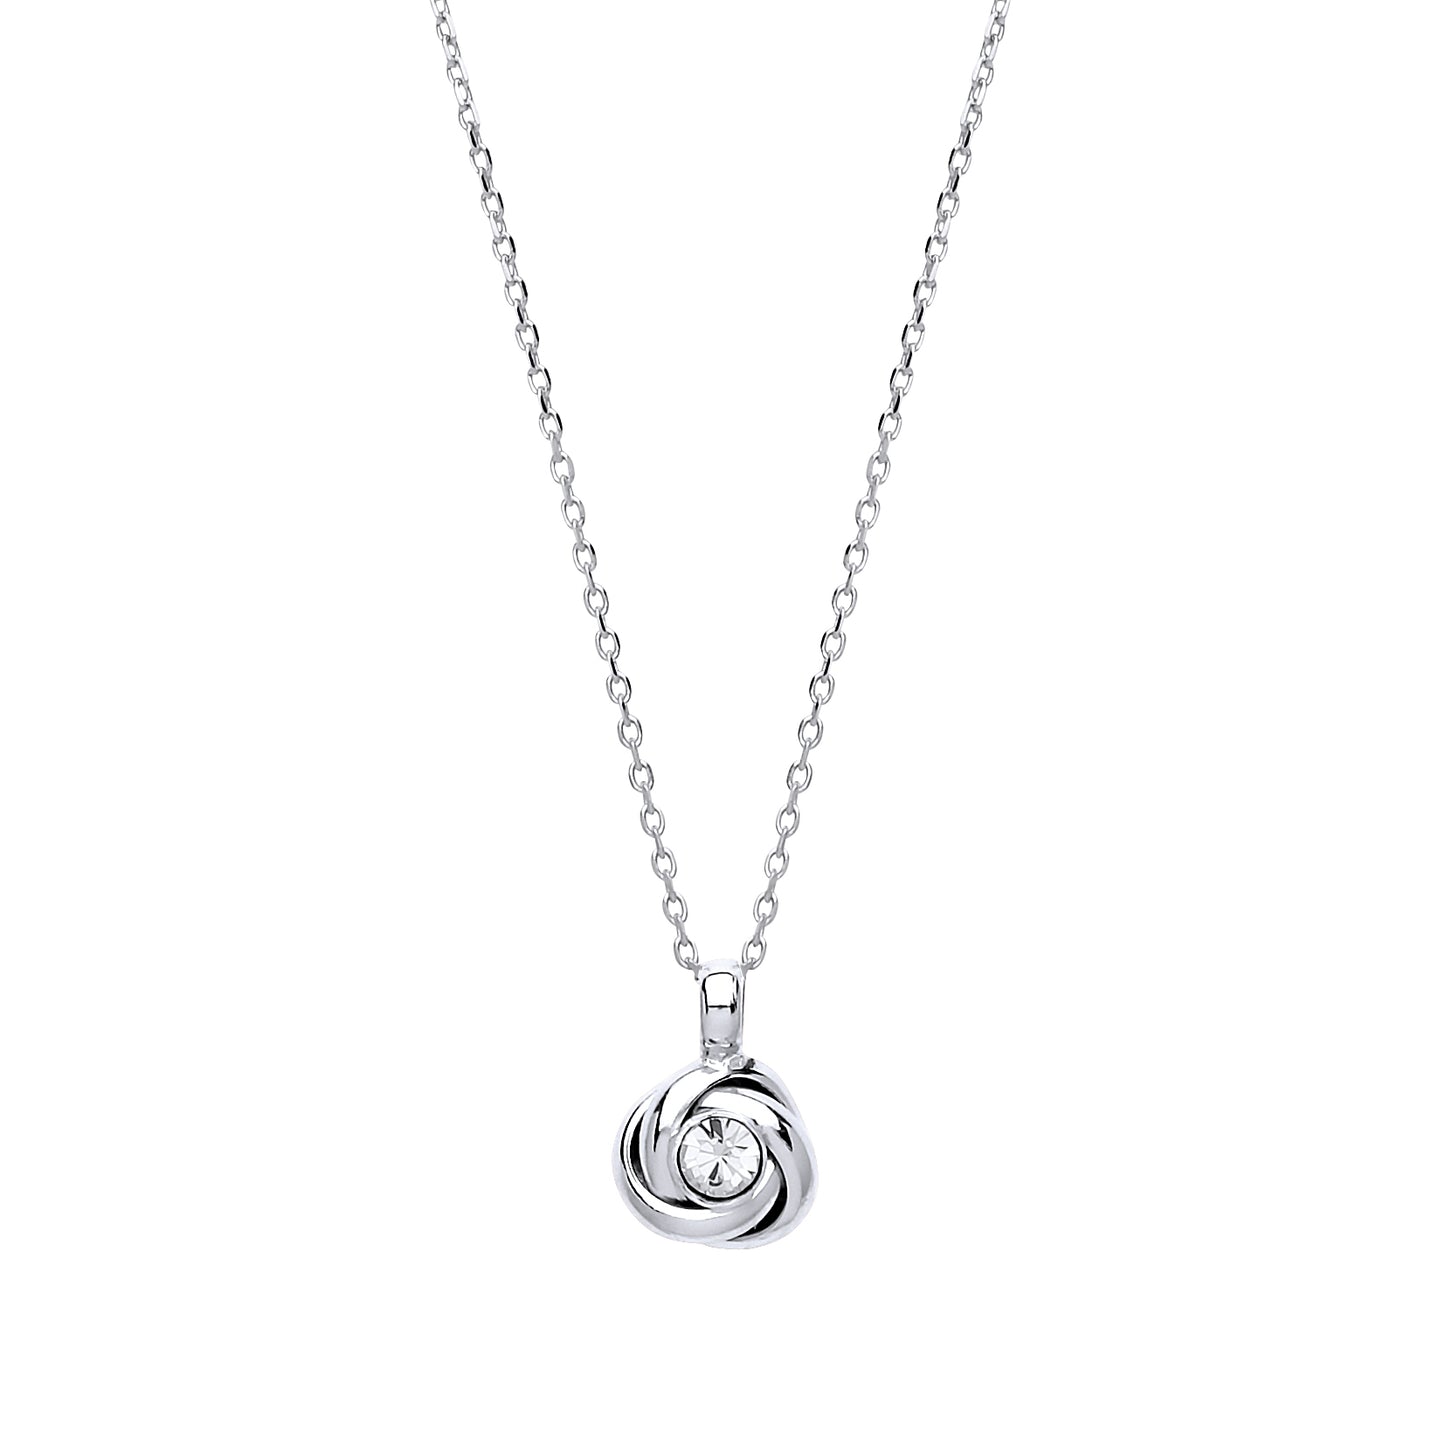 Silver  CZ Spiral Knot Solitaire Charm Necklace 16 + 1 inch - GVK197